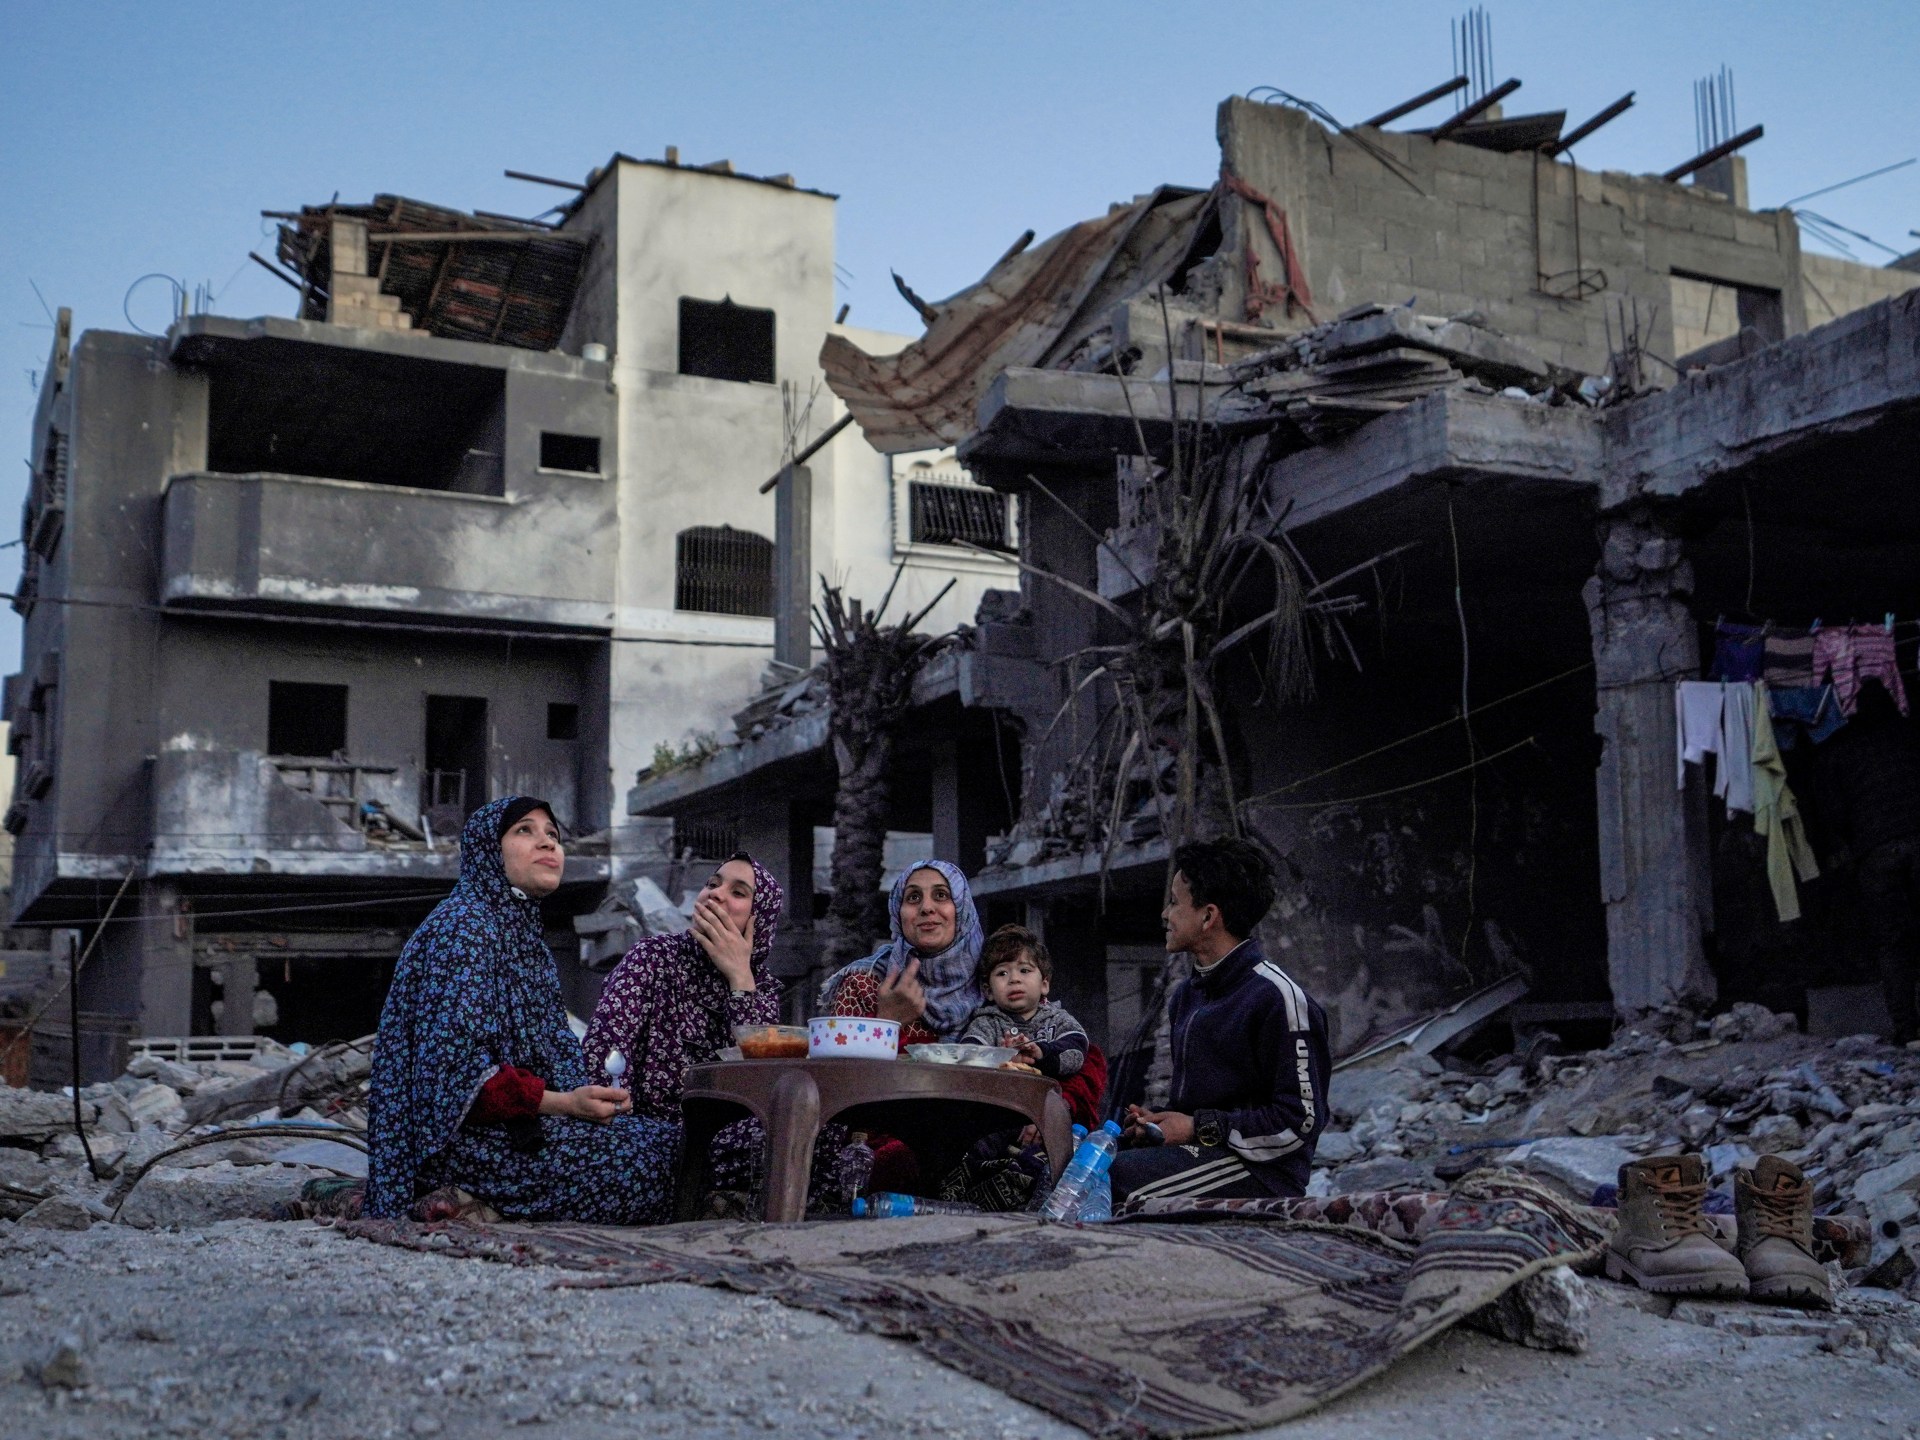 Week in pictures: From an iftar meal in Gaza to last election day in Russia